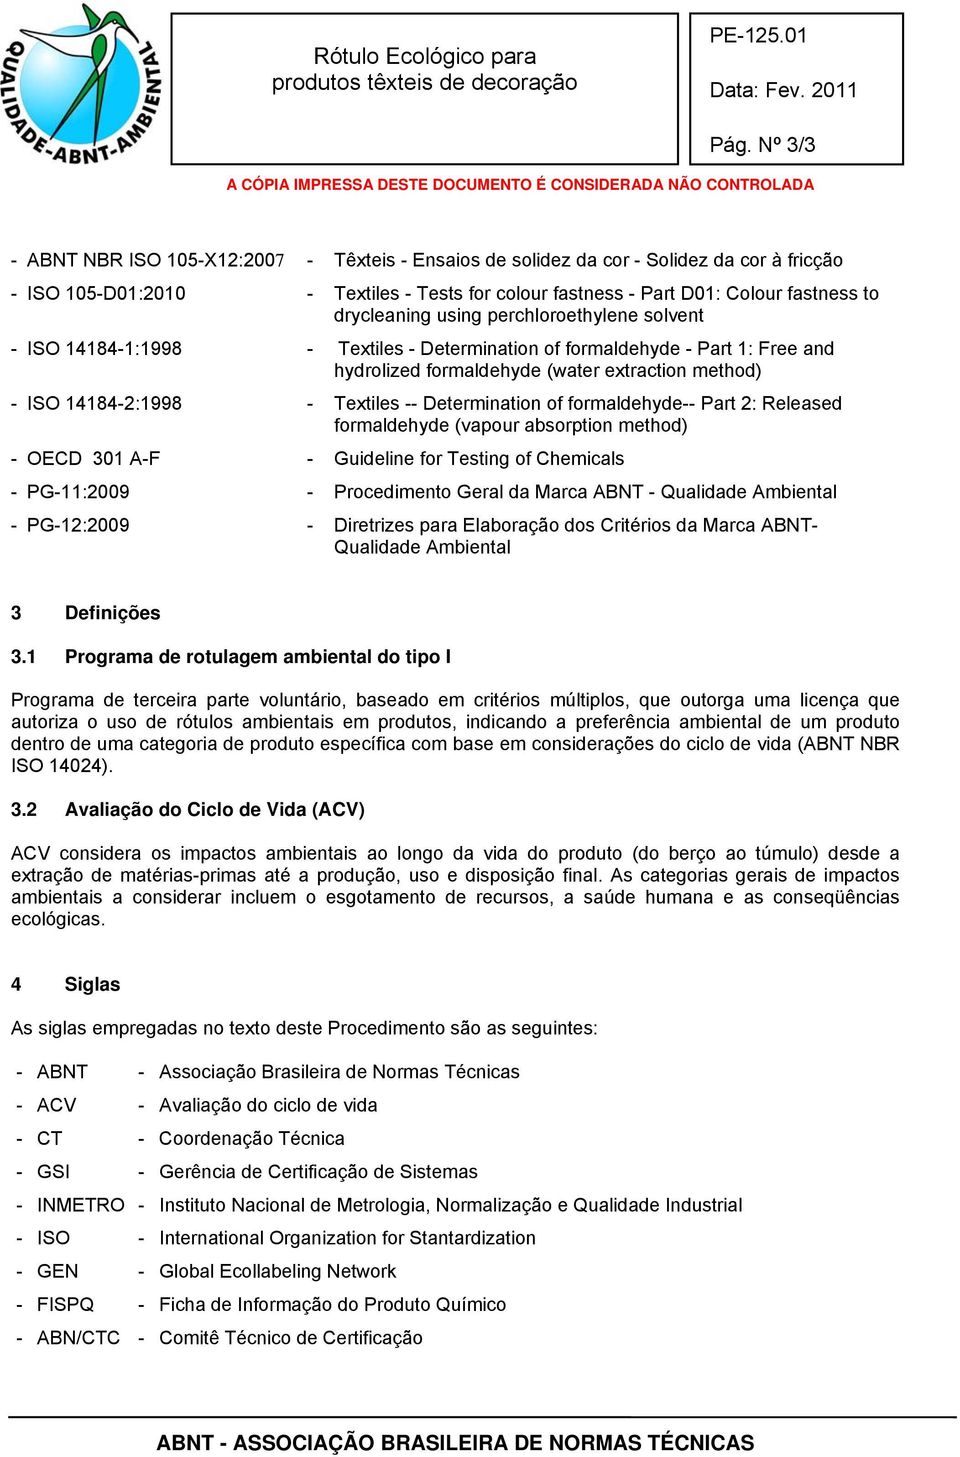 Textiles -- Determination of formaldehyde-- Part 2: Released formaldehyde (vapour absorption method) - OECD 301 A-F - Guideline for Testing of Chemicals - PG-11:2009 - Procedimento Geral da Marca